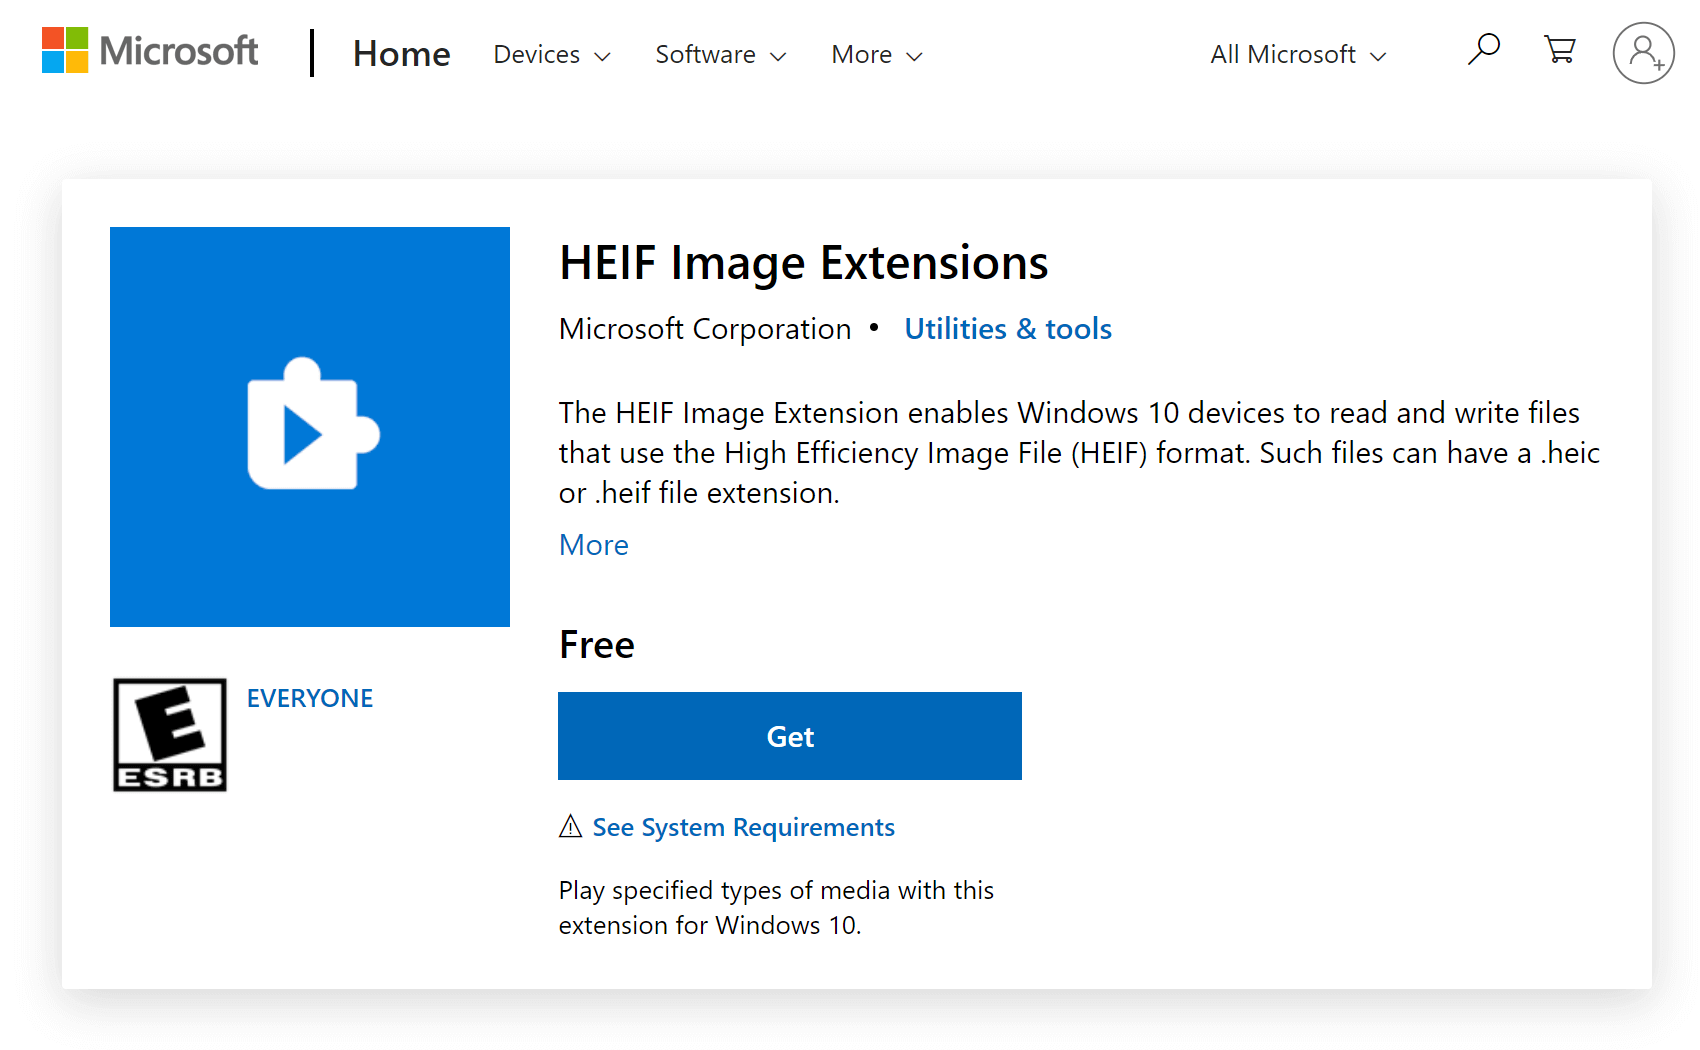 Install the HEIF Image Extensions